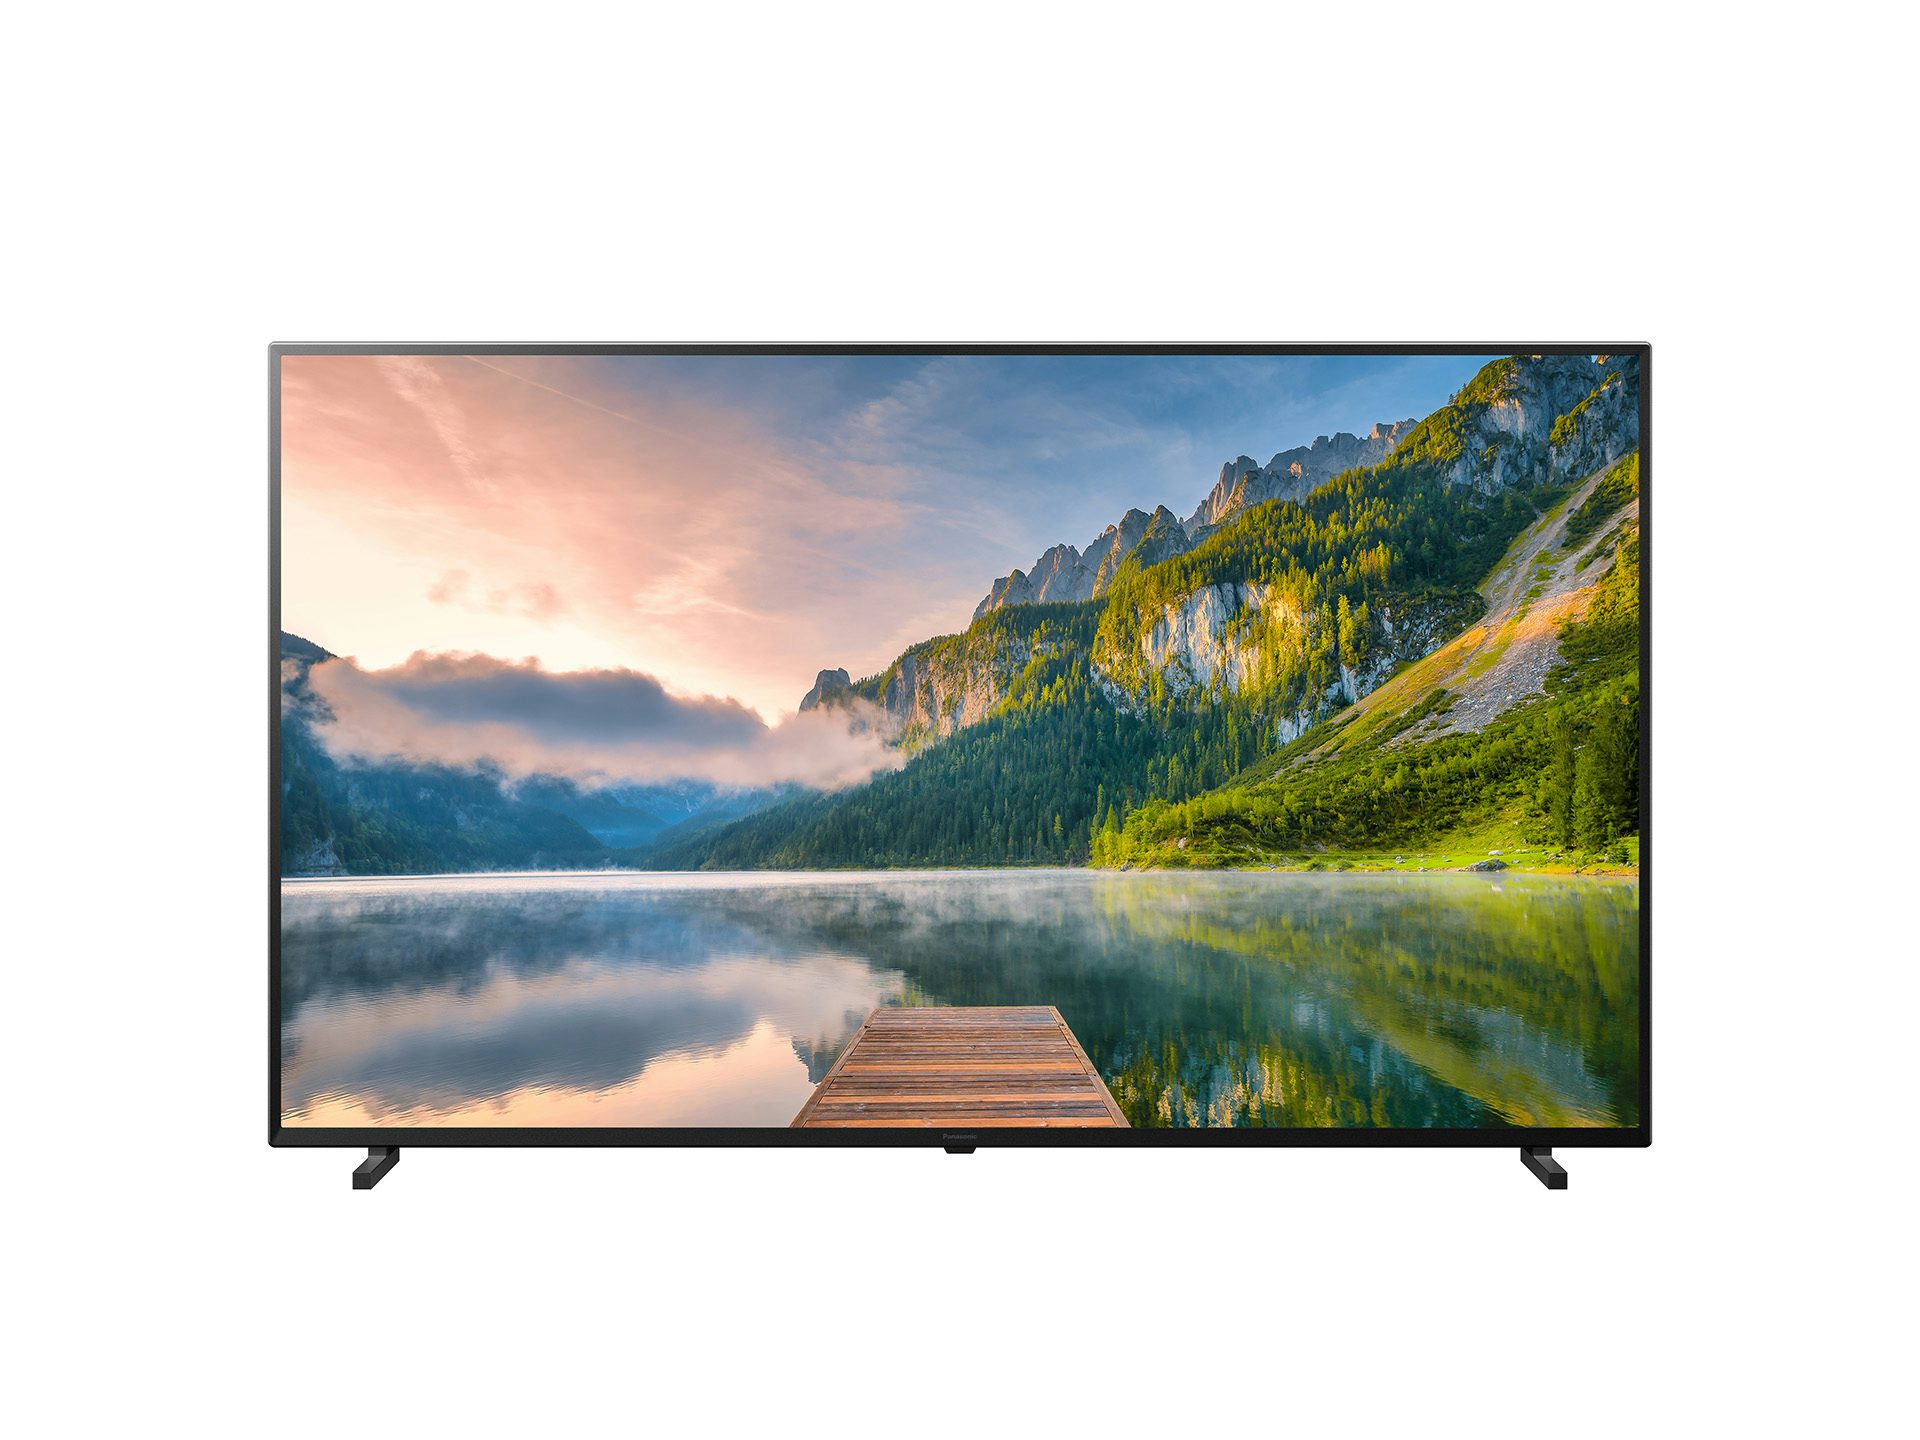 58" LED TV 50hz, Android, HDR10+